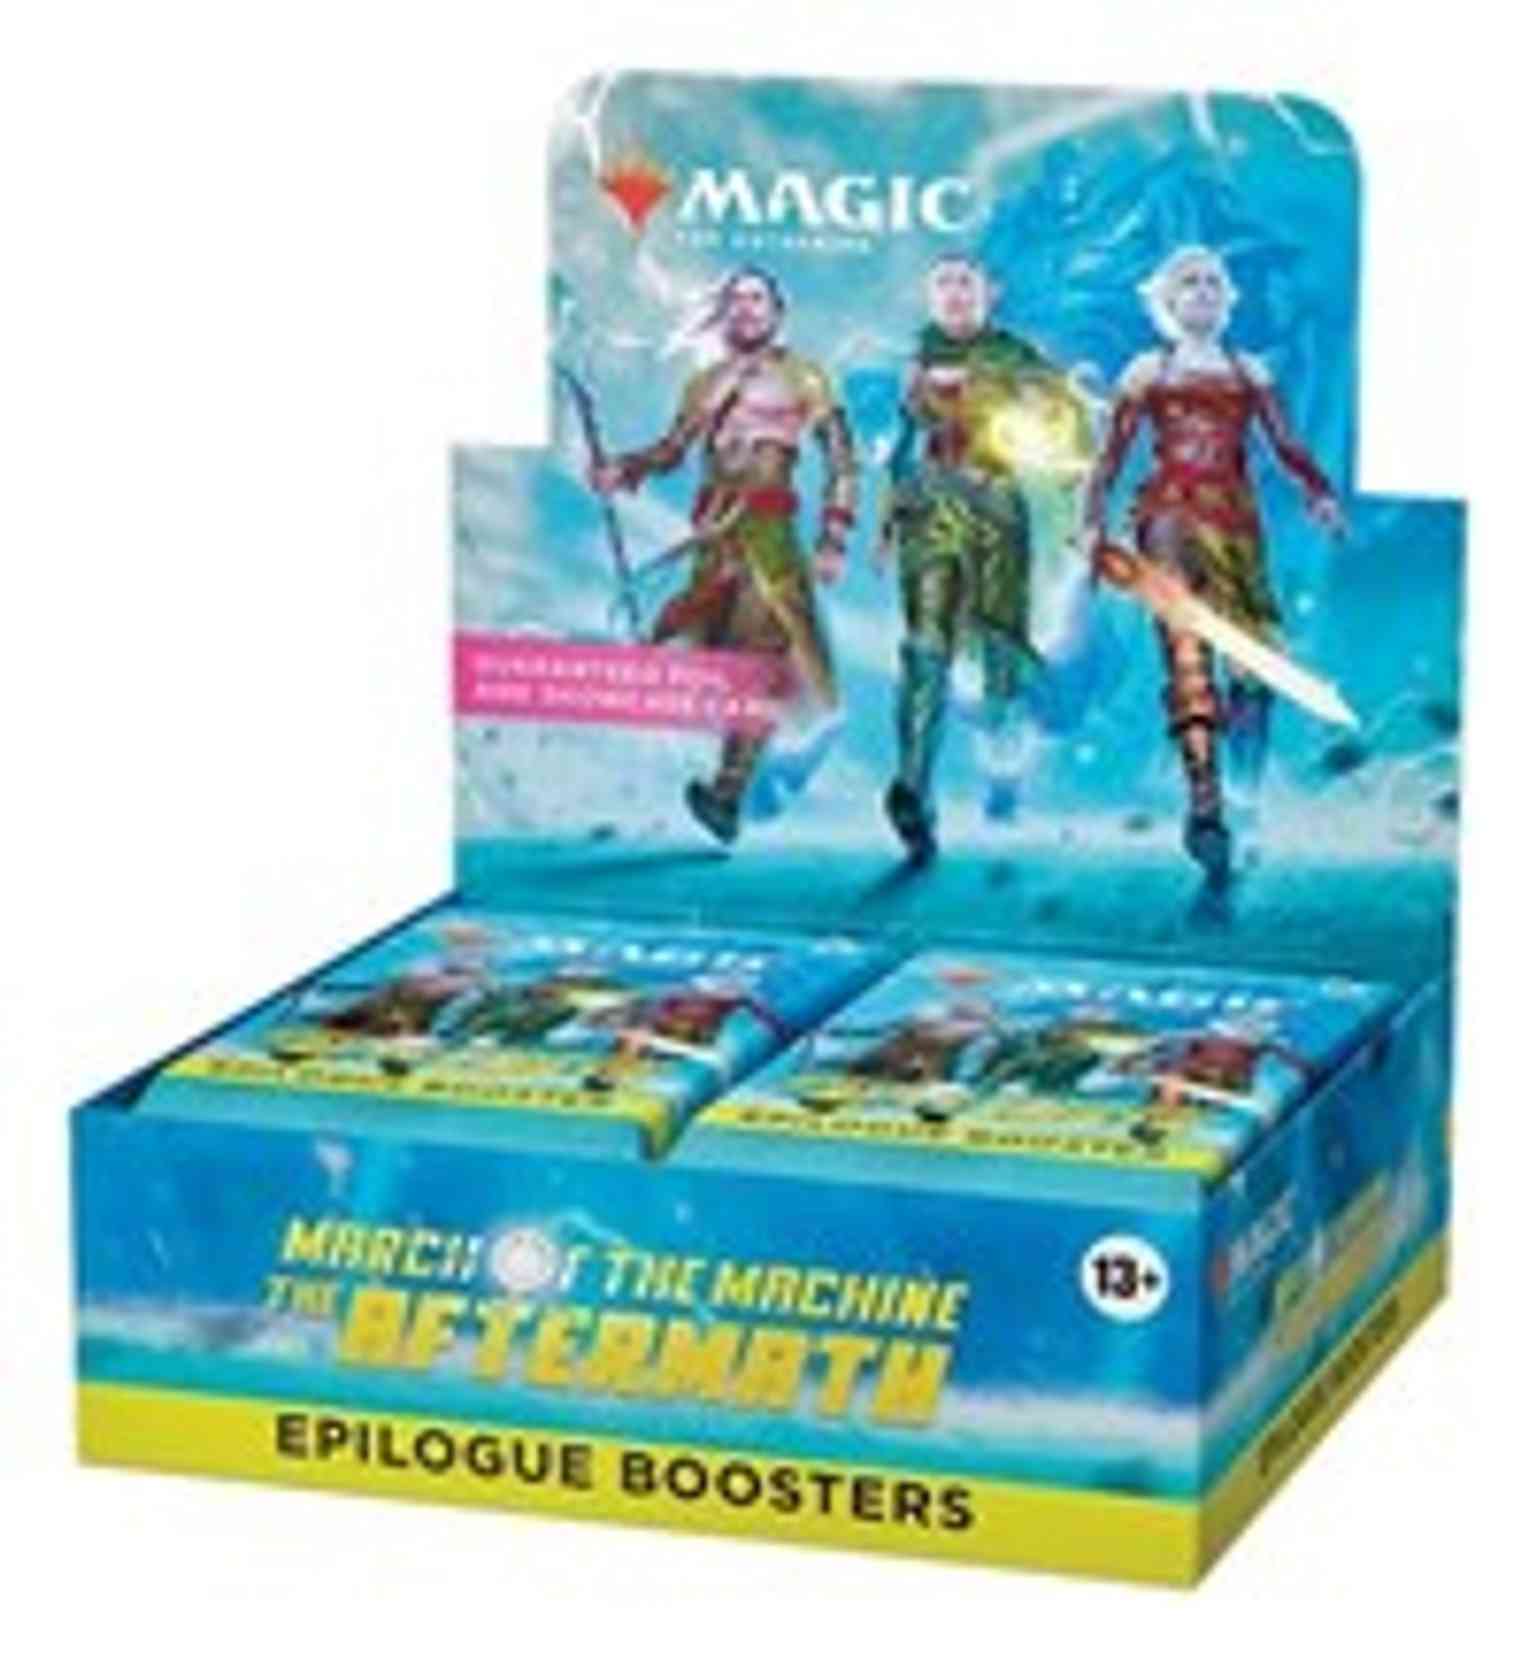 March of the Machine: The Aftermath - Epilogue Booster Display magic card front